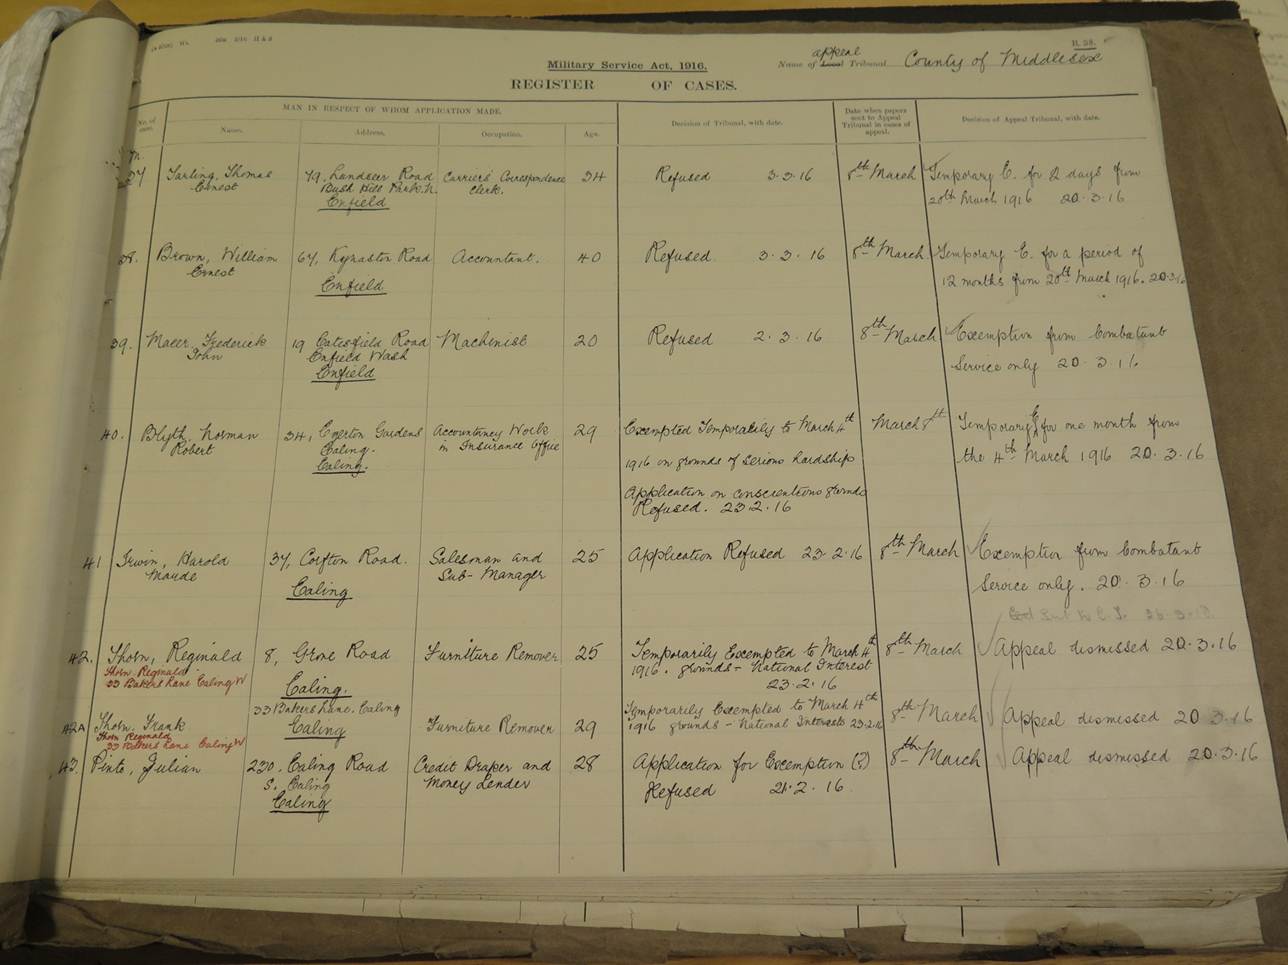 Image of the Register of Appeals